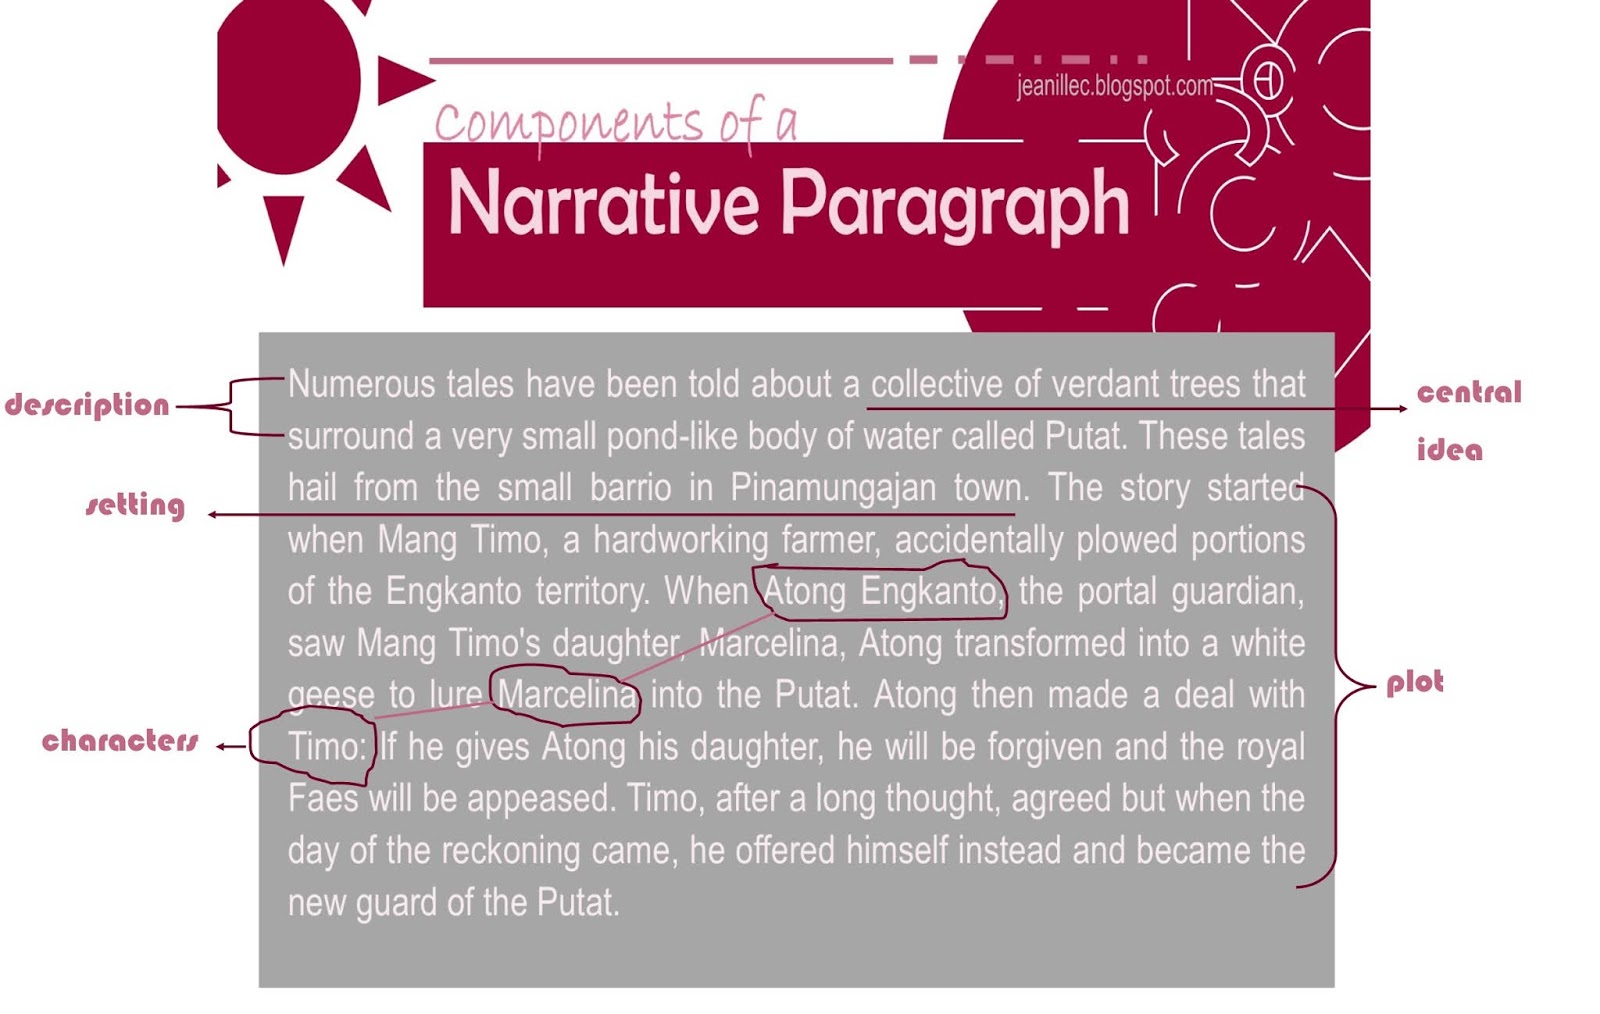 Ms Jeanille: COMPONENTS OF A NARRATIVE PARAGRAPH